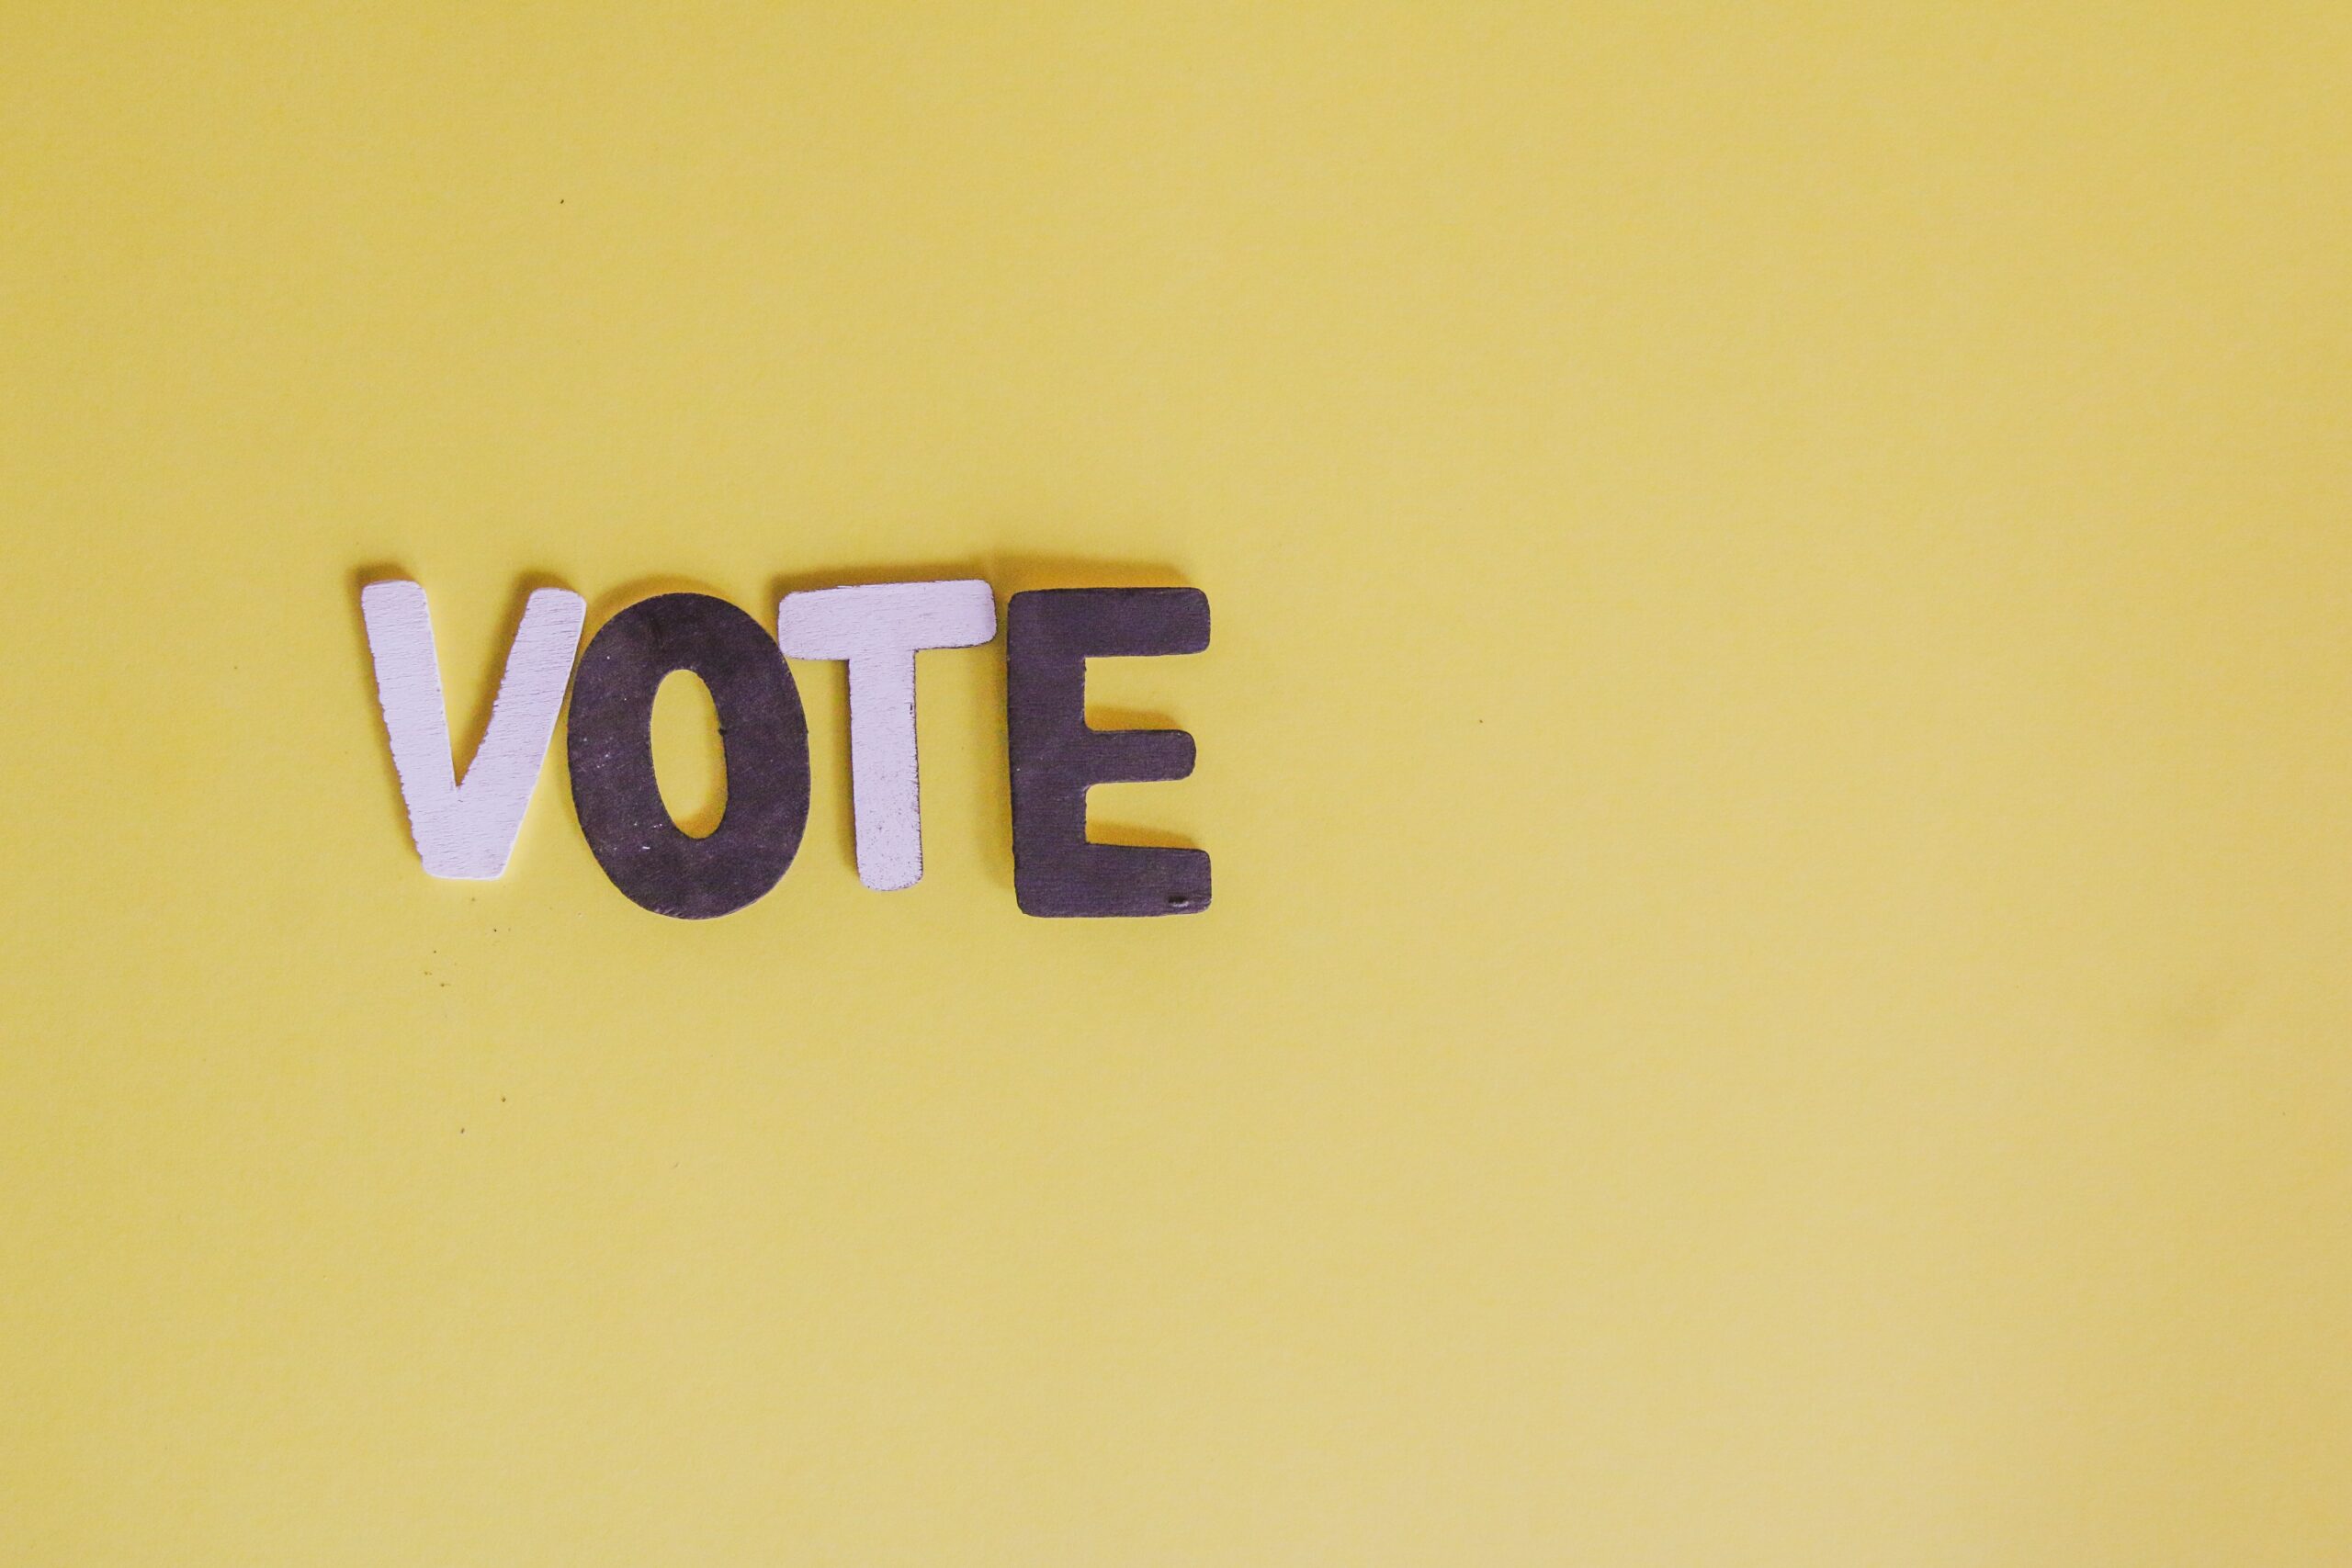 The word "vote" in brown and white letters on a yellow background